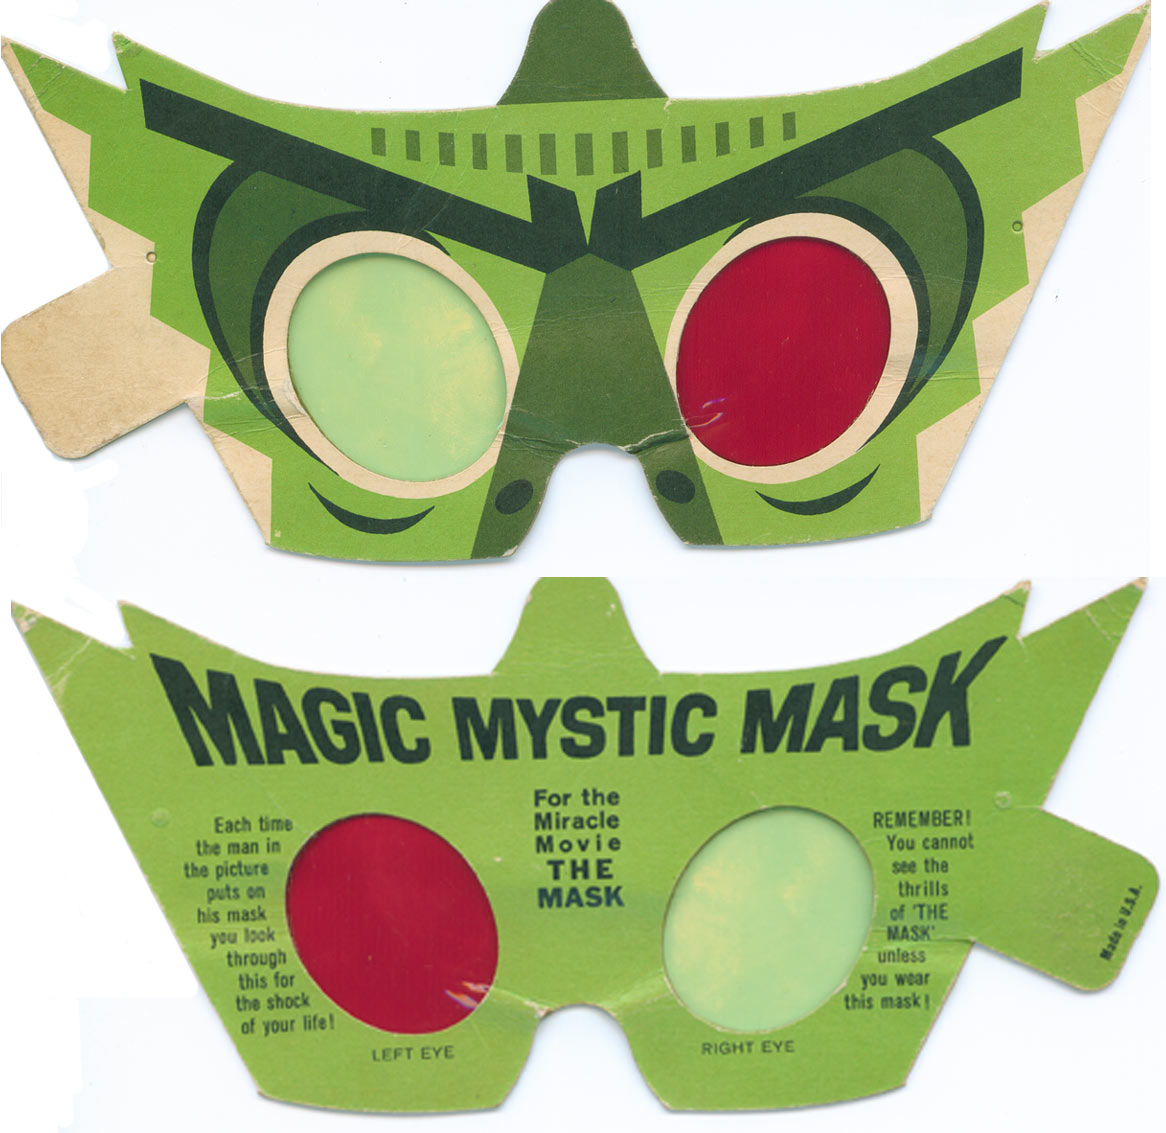 Mask_from_Mask_Movie.jpg